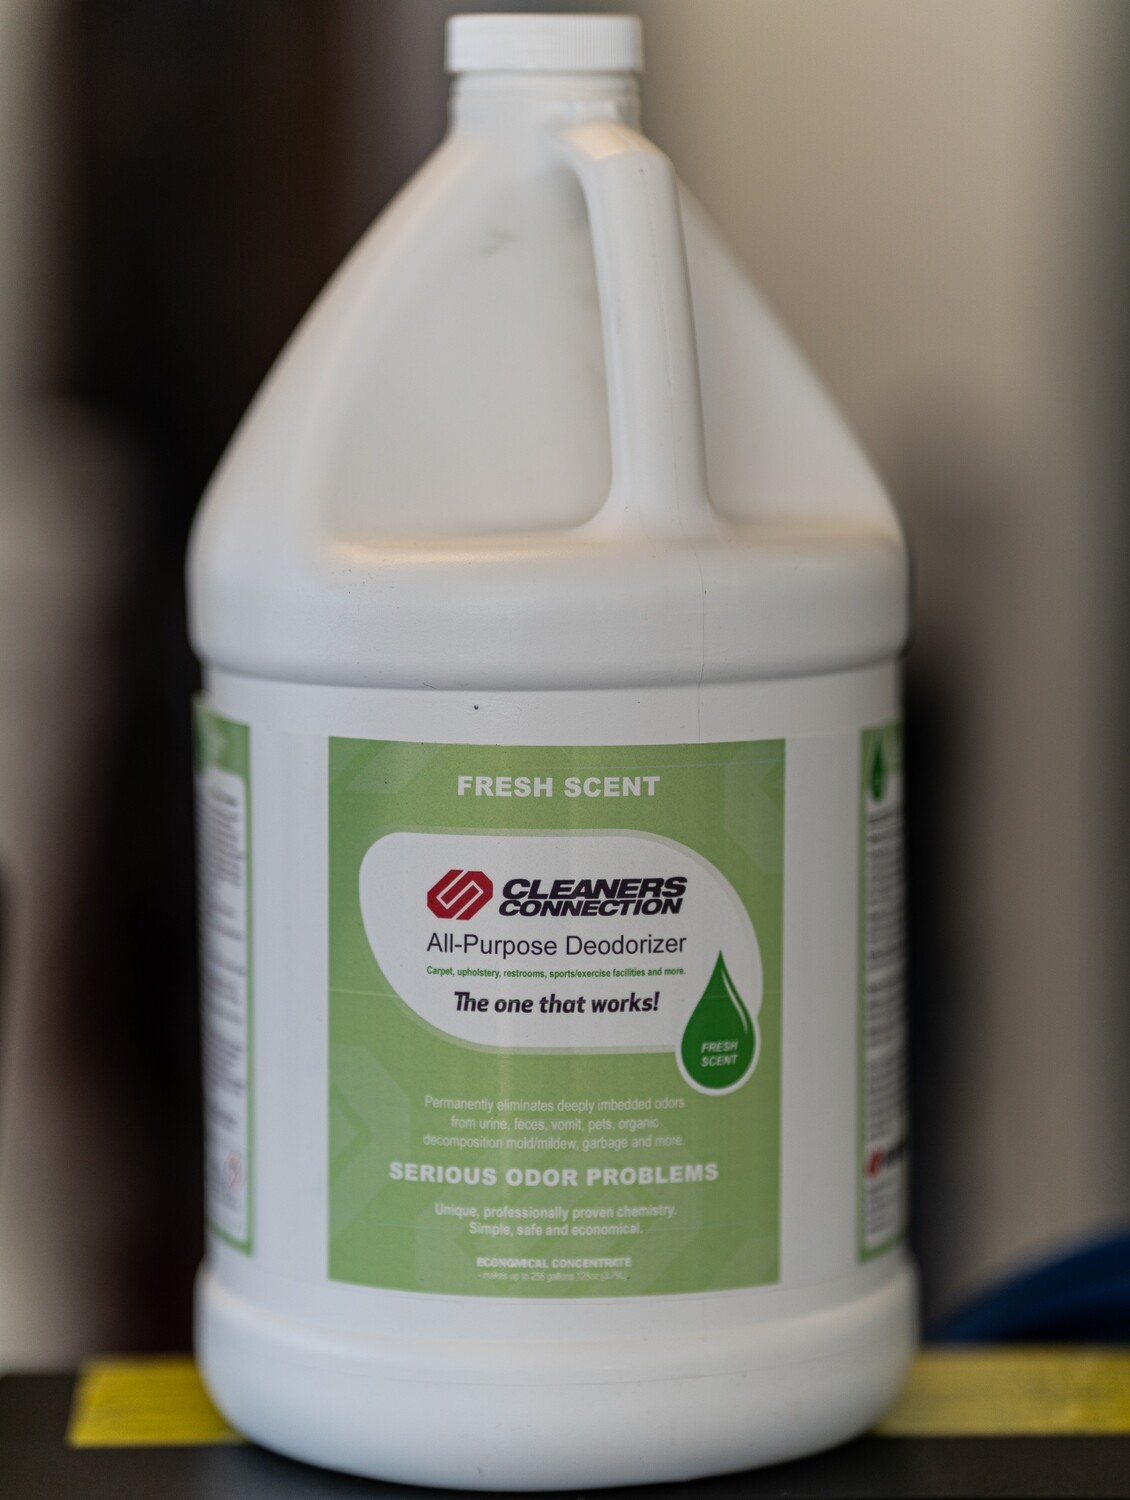 All Purpose Deodorizer Fresh Scent by Cleaners Connection